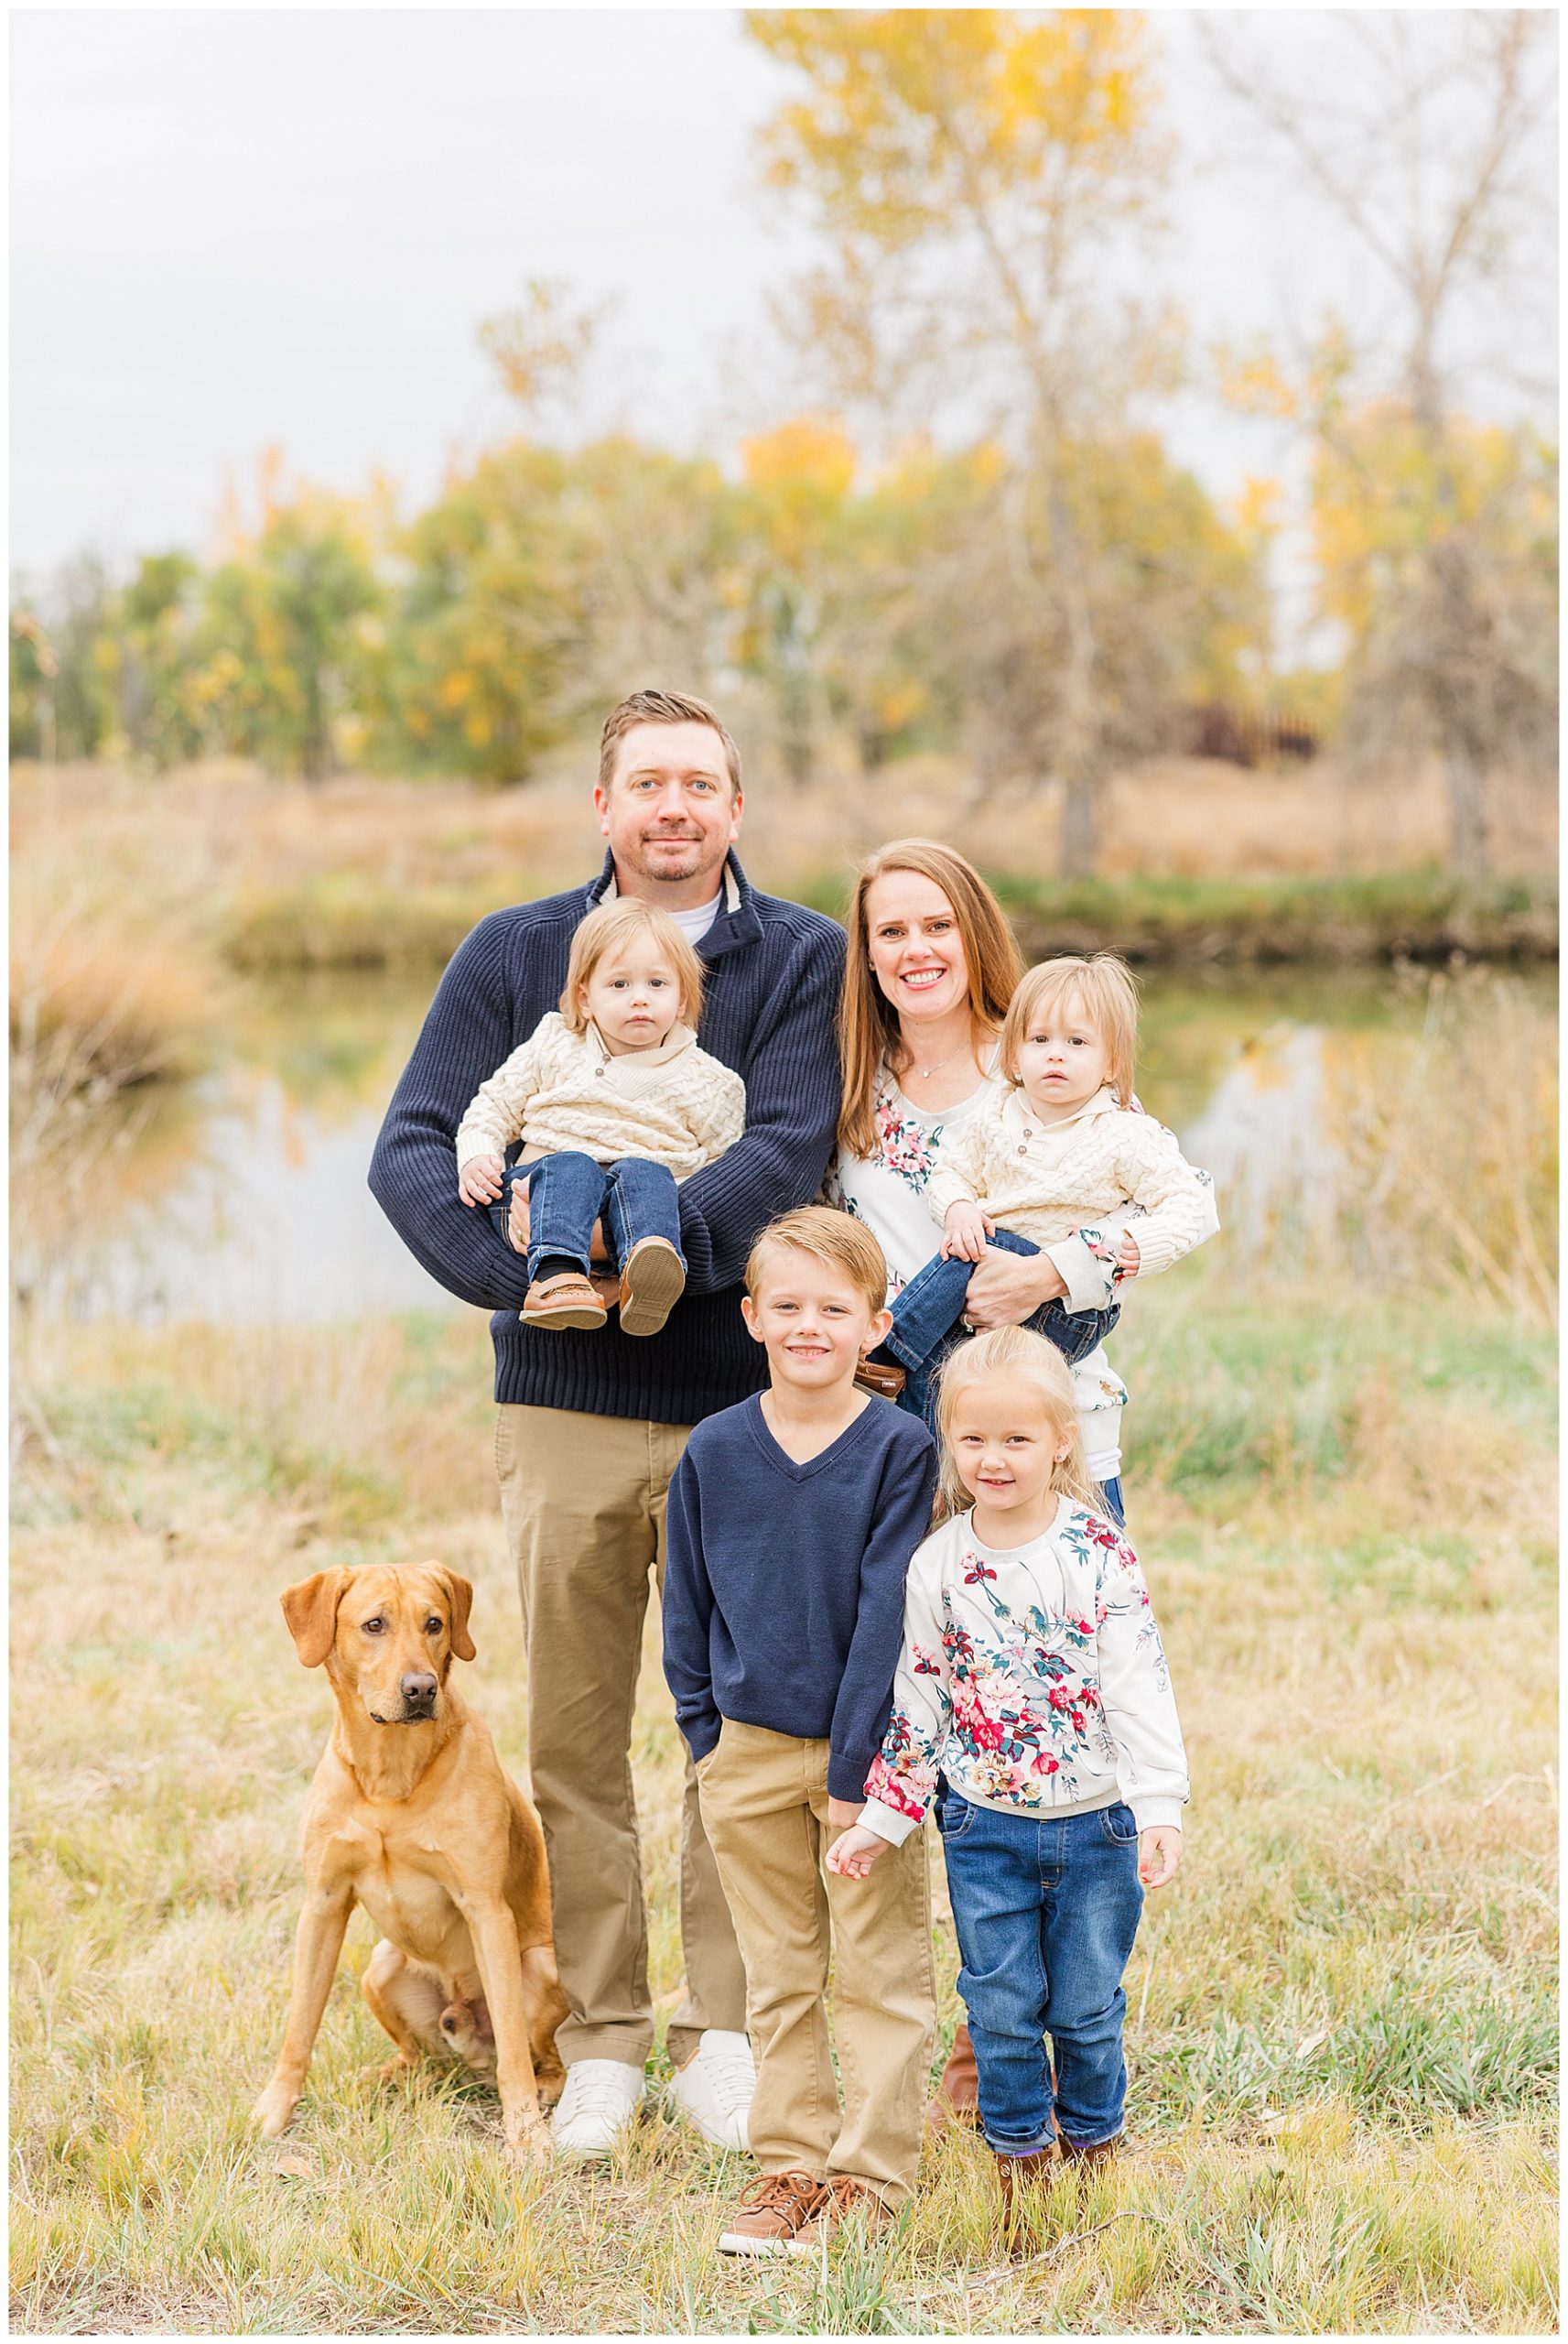 Morning fall mini session with family of six and their dog